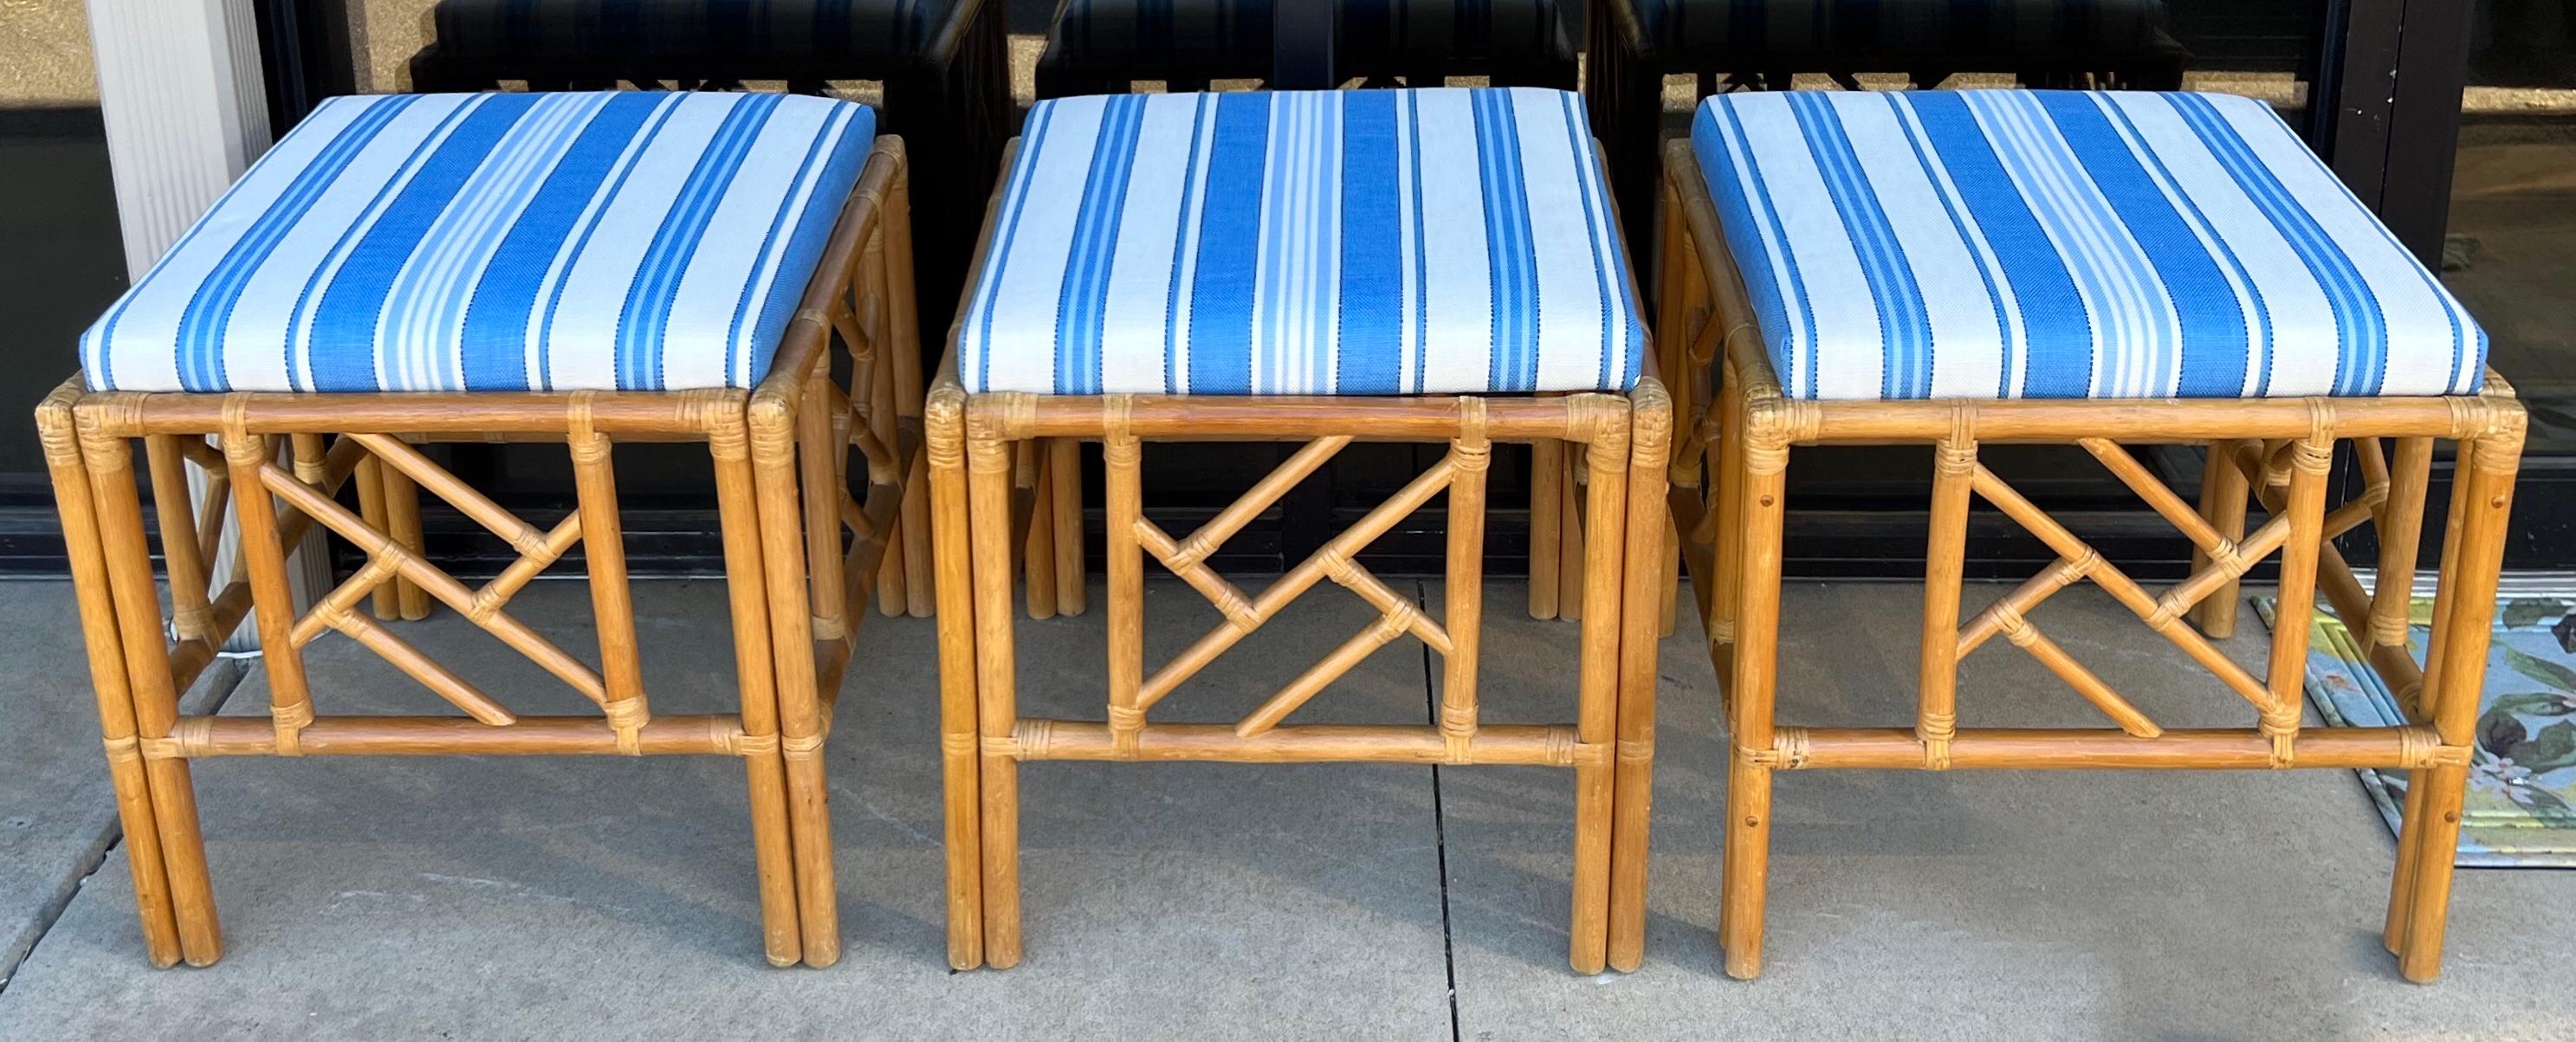 Upholstery Chinese Chippendale Style Rattan / Bamboo Ottomans / Tables in Blue & White, 3 For Sale